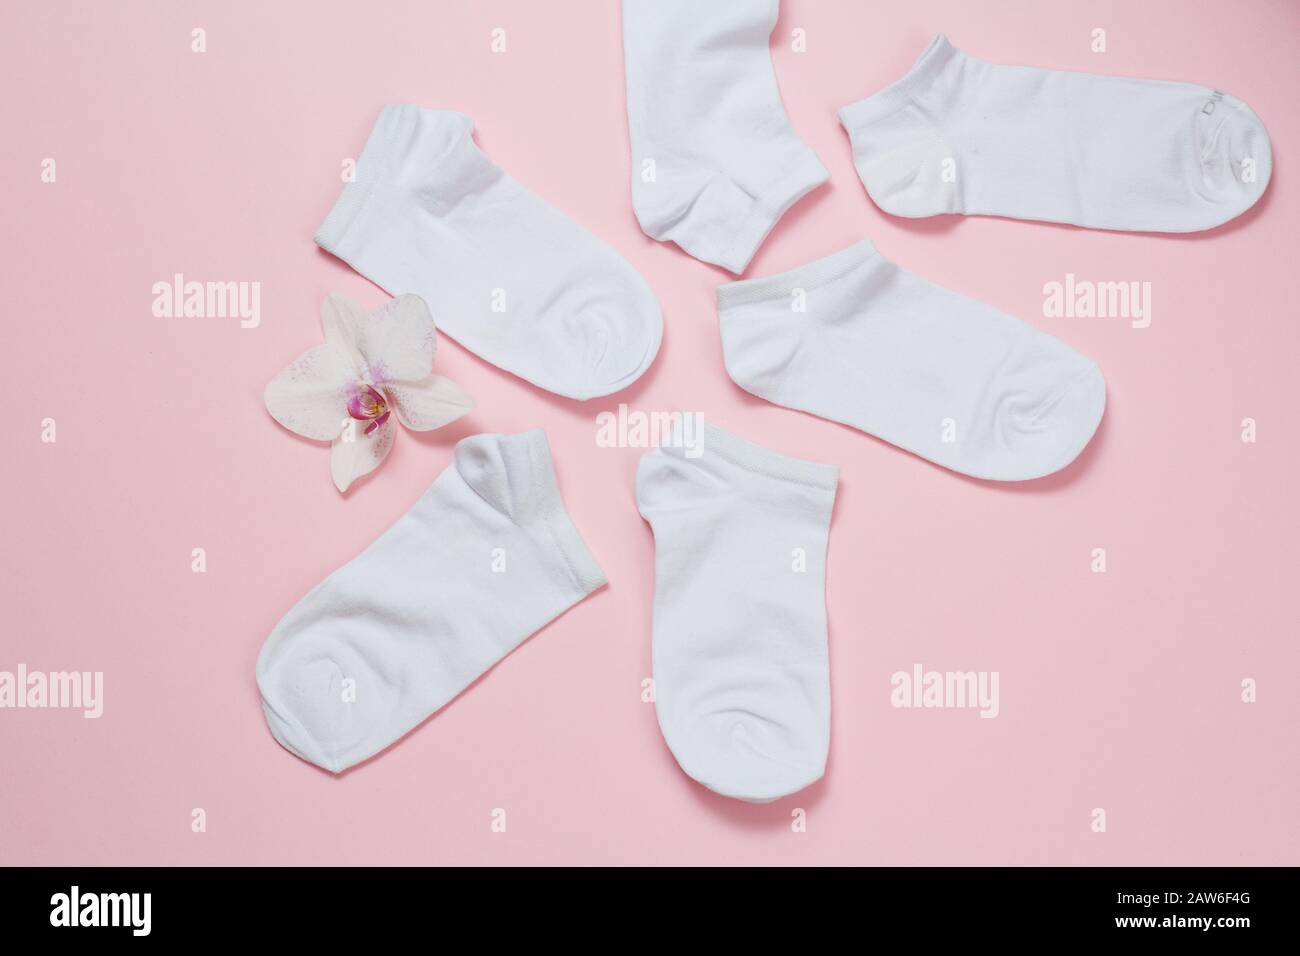 White women socks and orchid flower on a pink background, Top view. Stock Photo